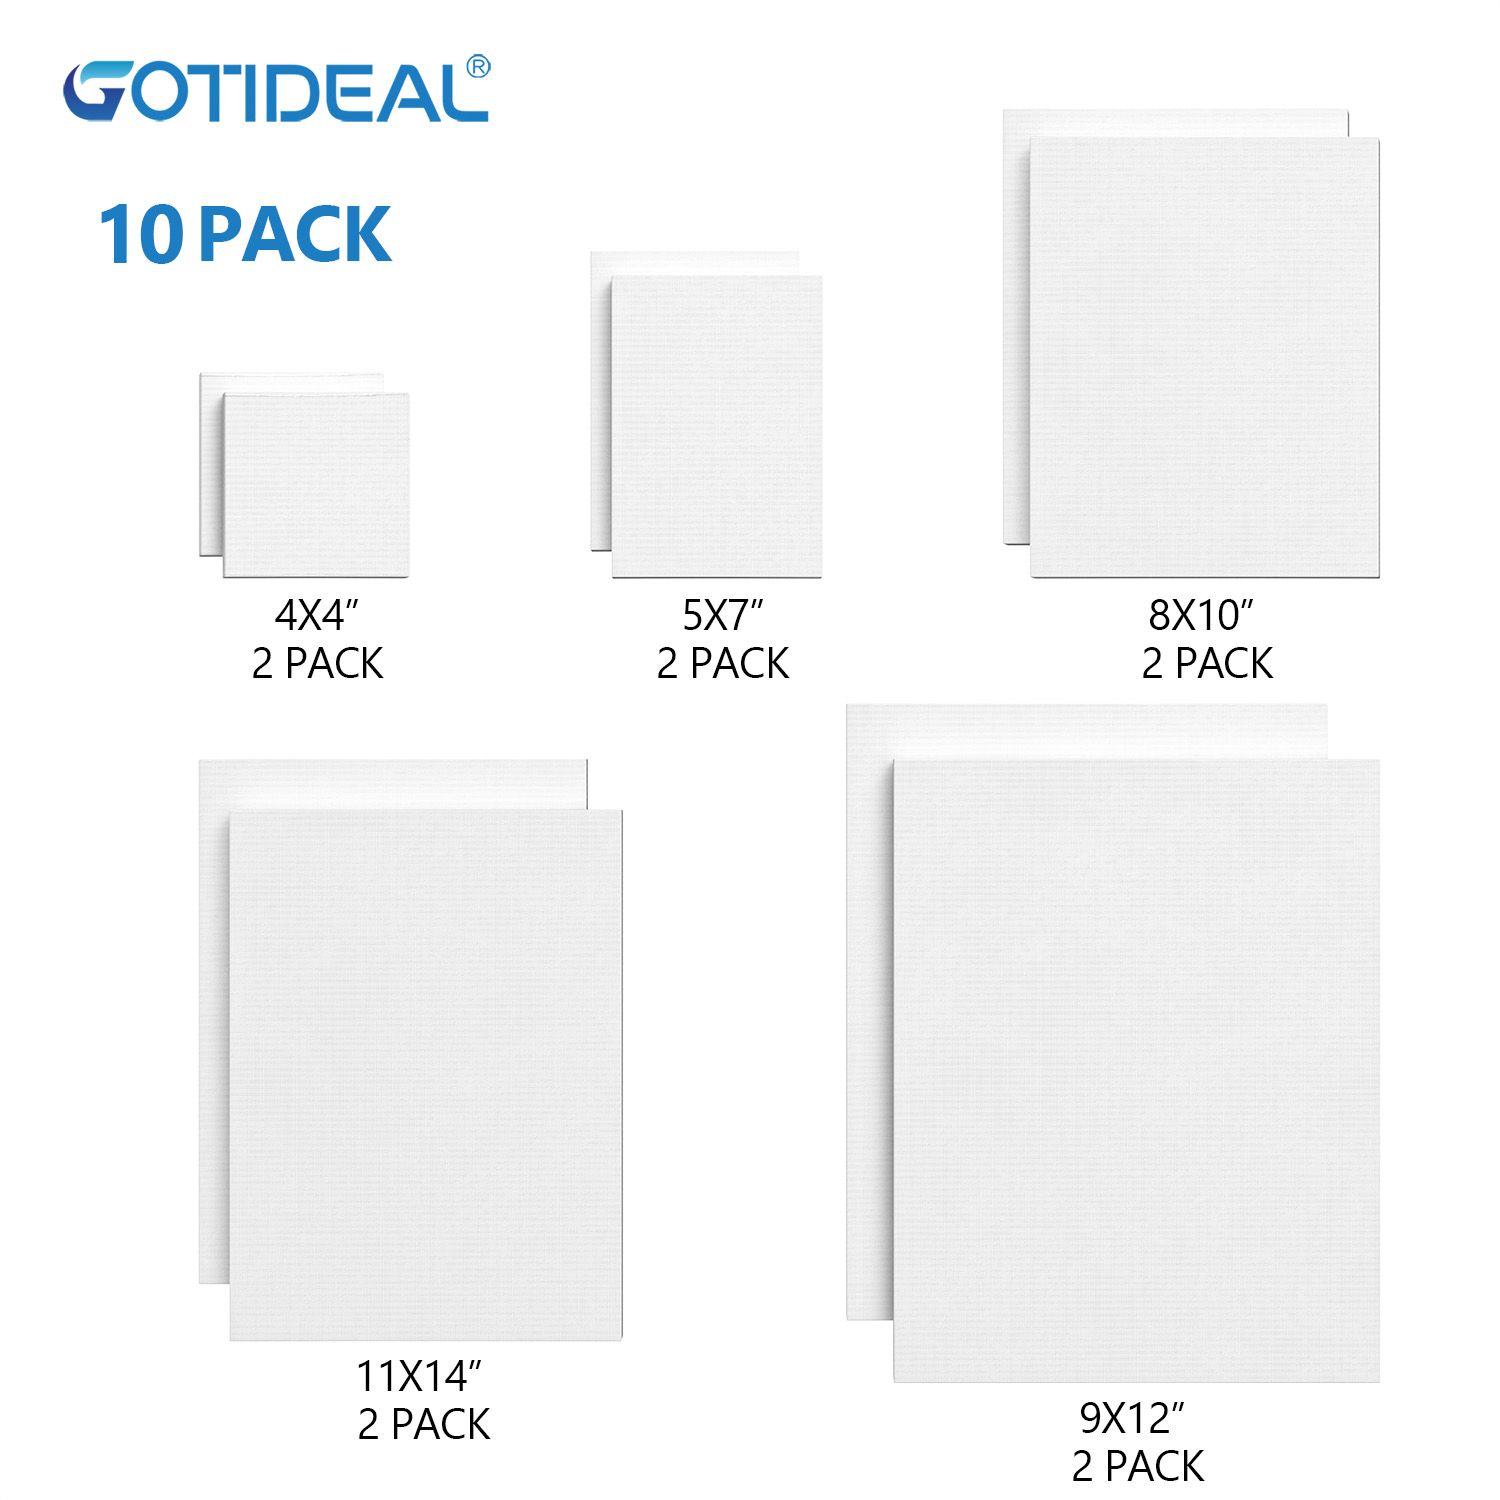 GOTIDEAL Stretched Canvas, Multi Pack 4x4", 5x7", 8x10",9x12", 11x14" Set of 10, Primed White - 100% Cotton Artist Canvas Boards for Painting, Acrylic Pouring, Oil Paint Dry & Wet Art Media